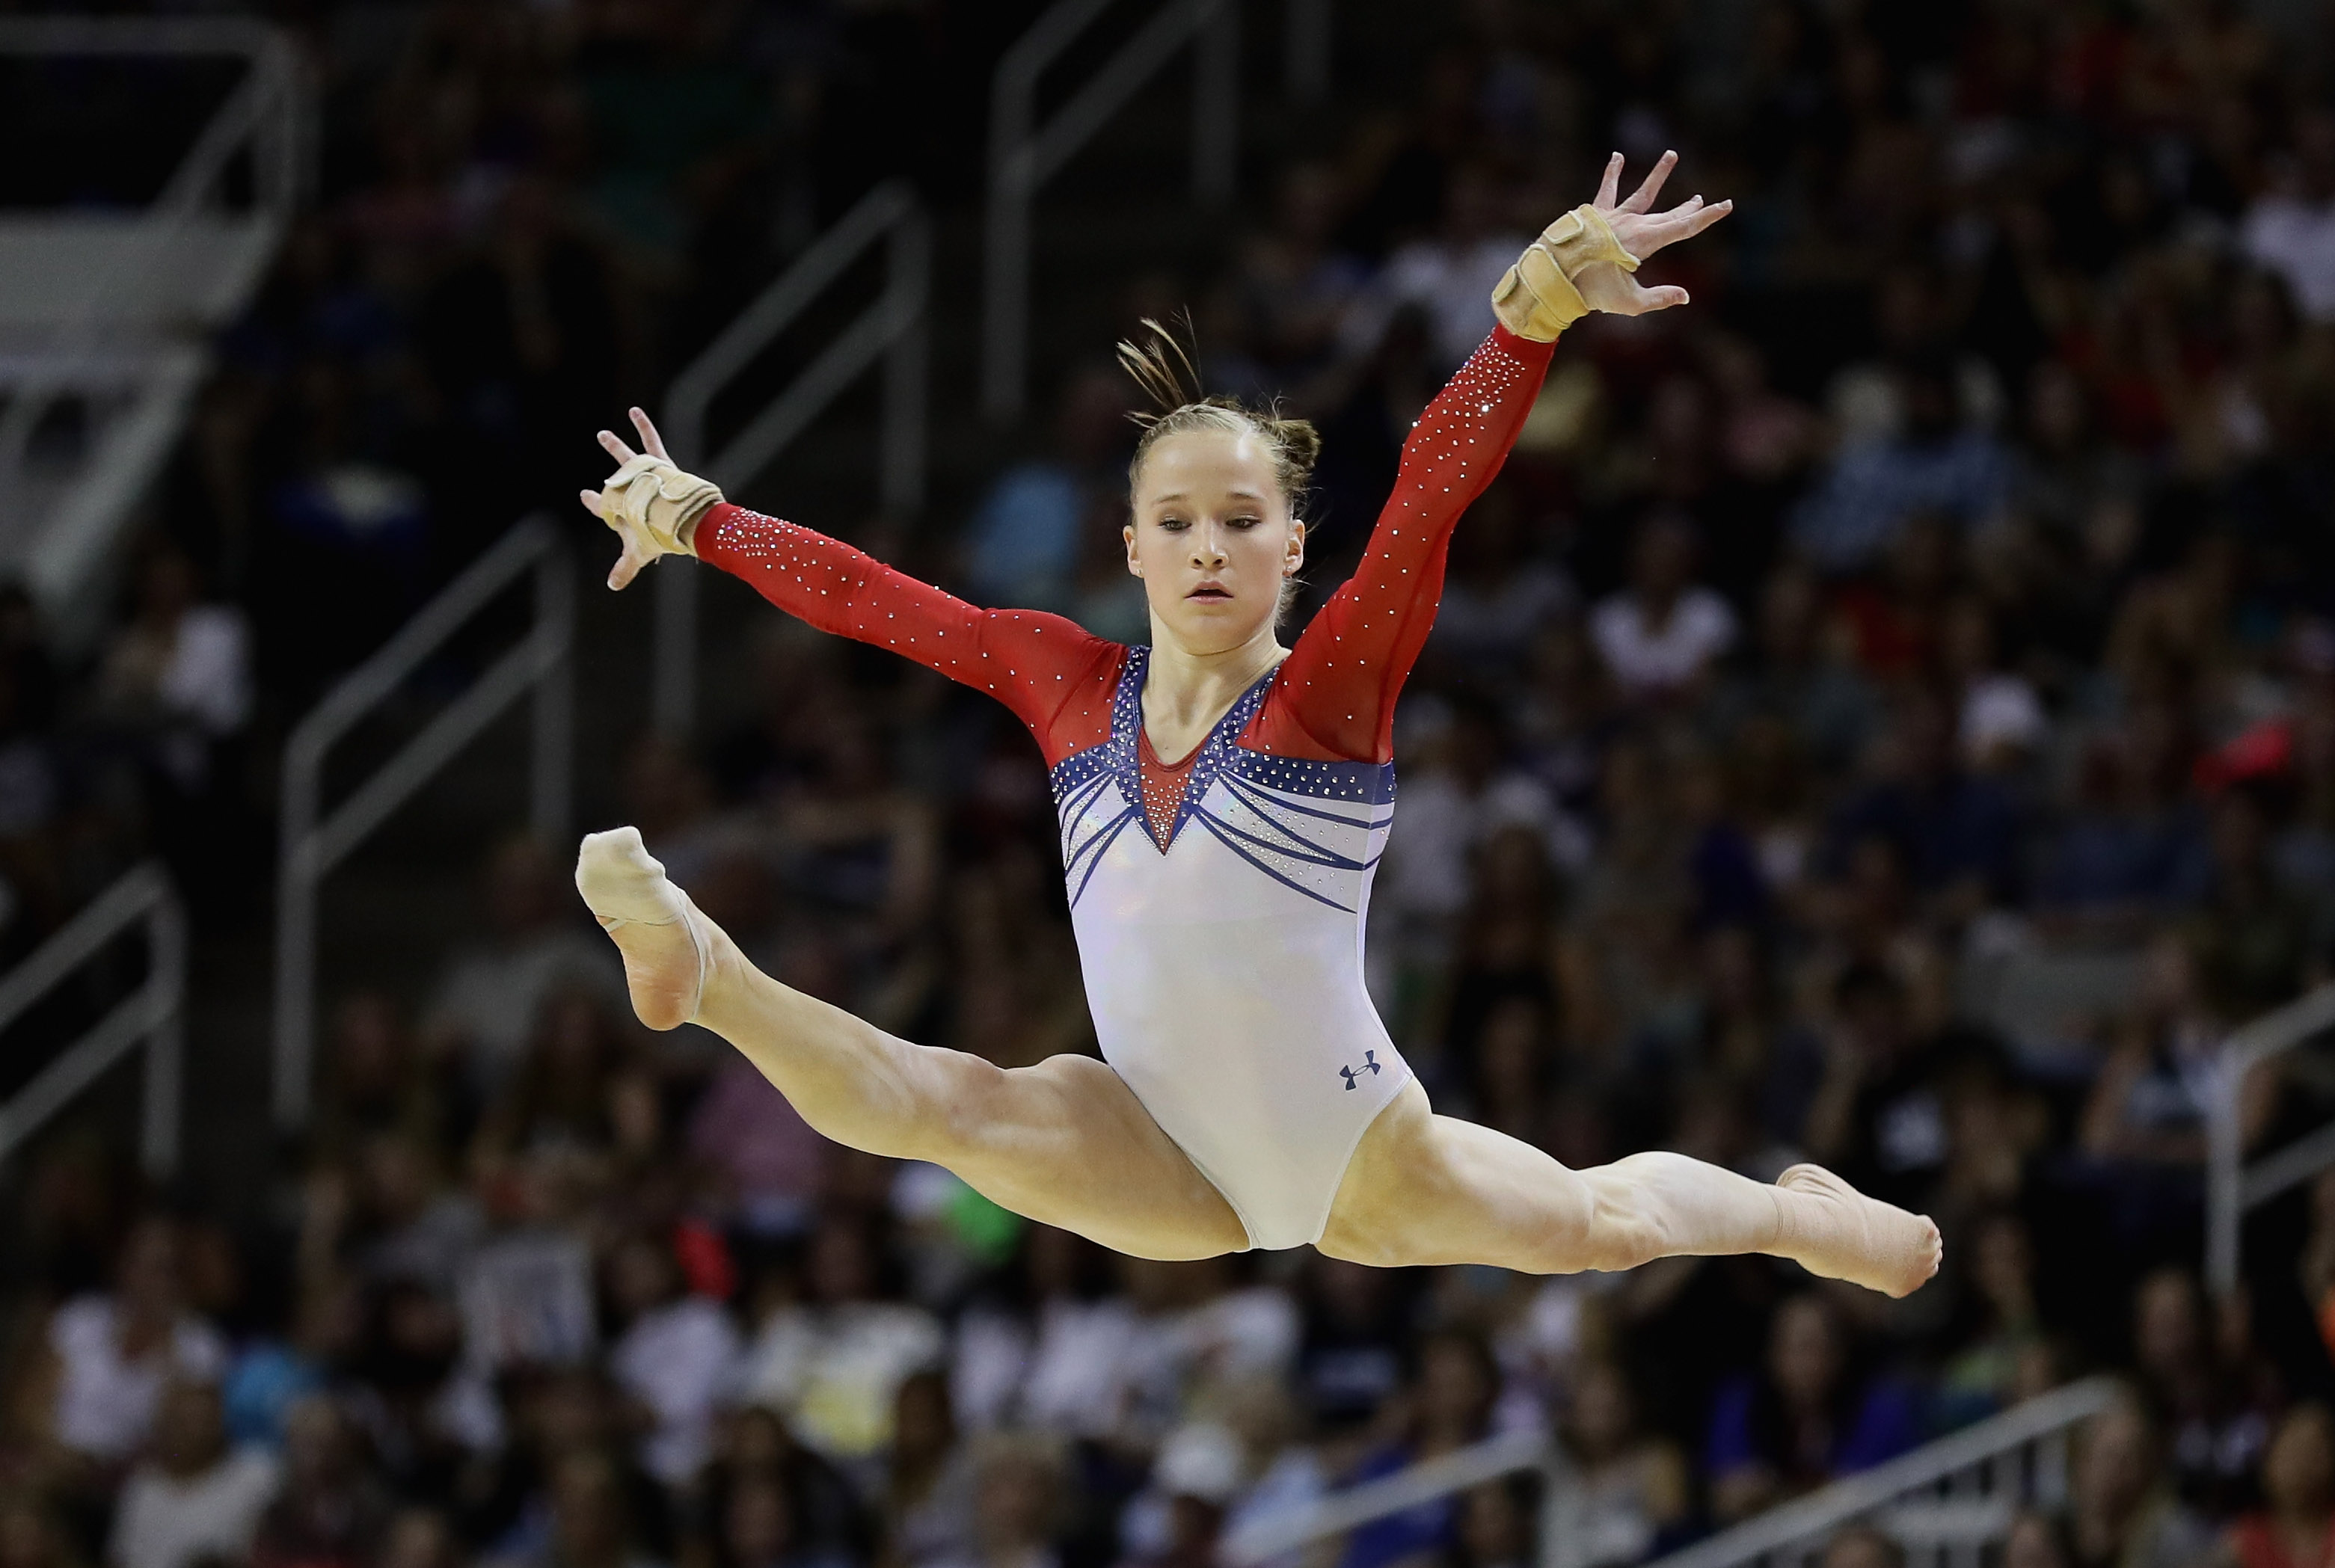 10 facts about the diverse, strong five women of the USA Gymnastics